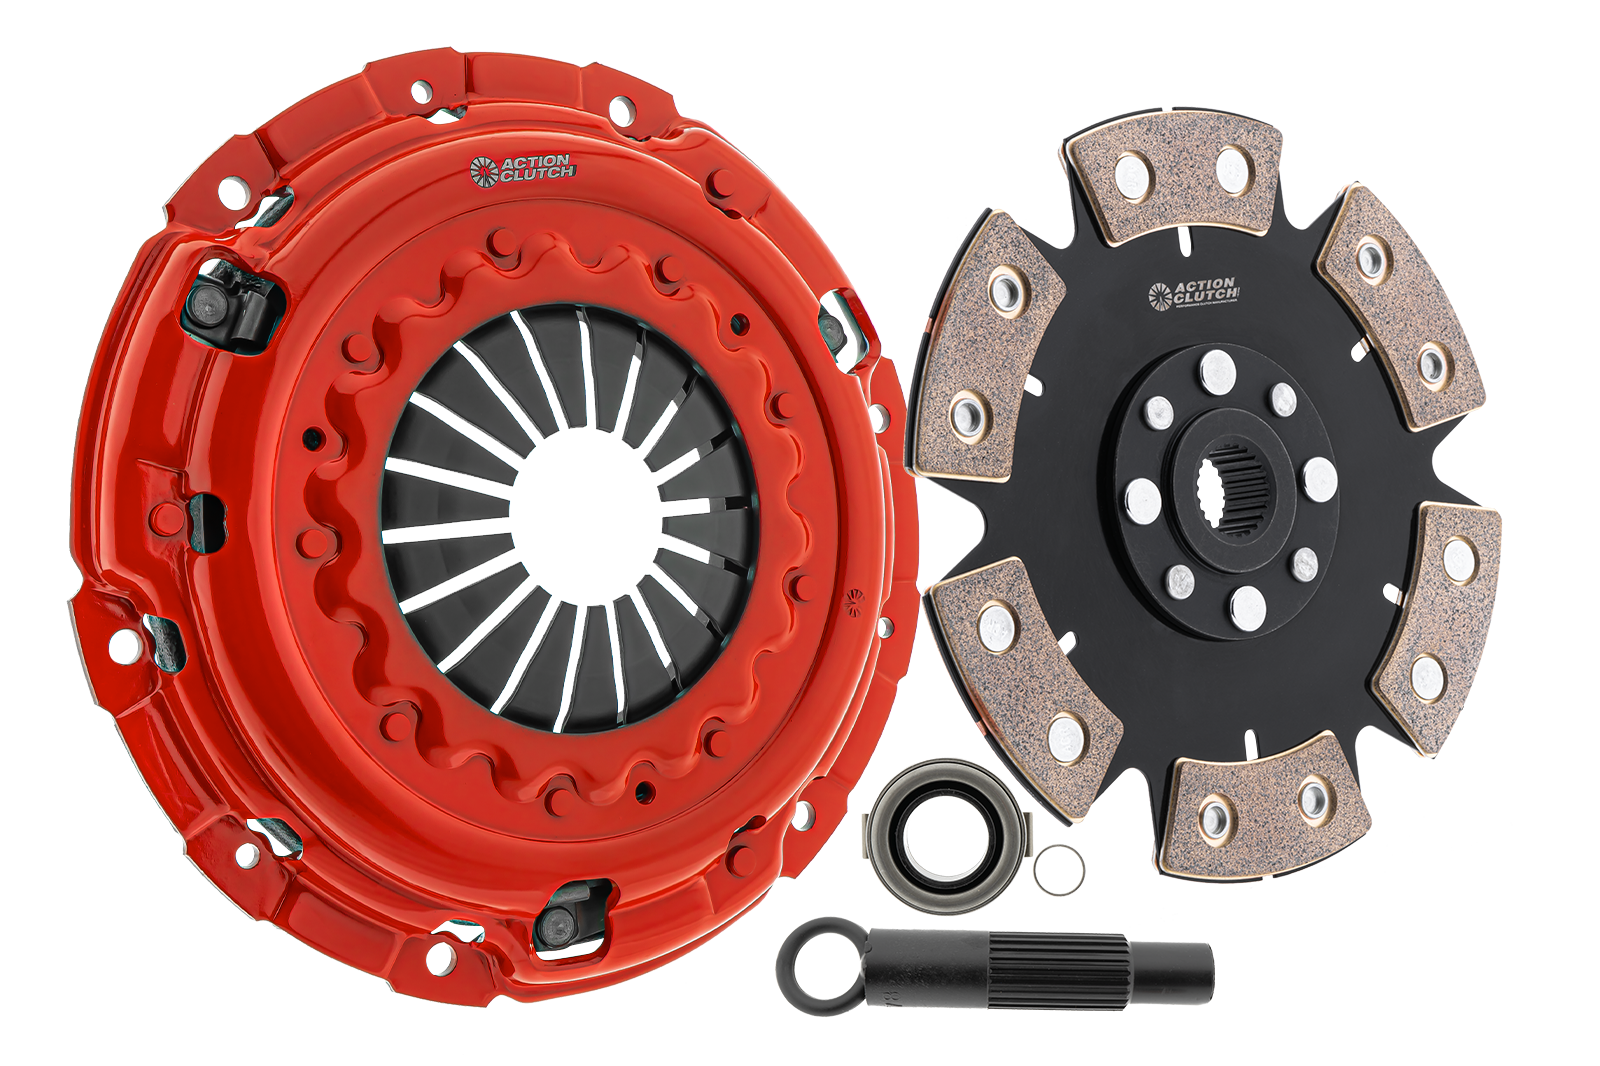 Stage 6 Clutch Kit (2MD) for Acura CL 1997-1999 2.2L/2.3L (F22, F23)